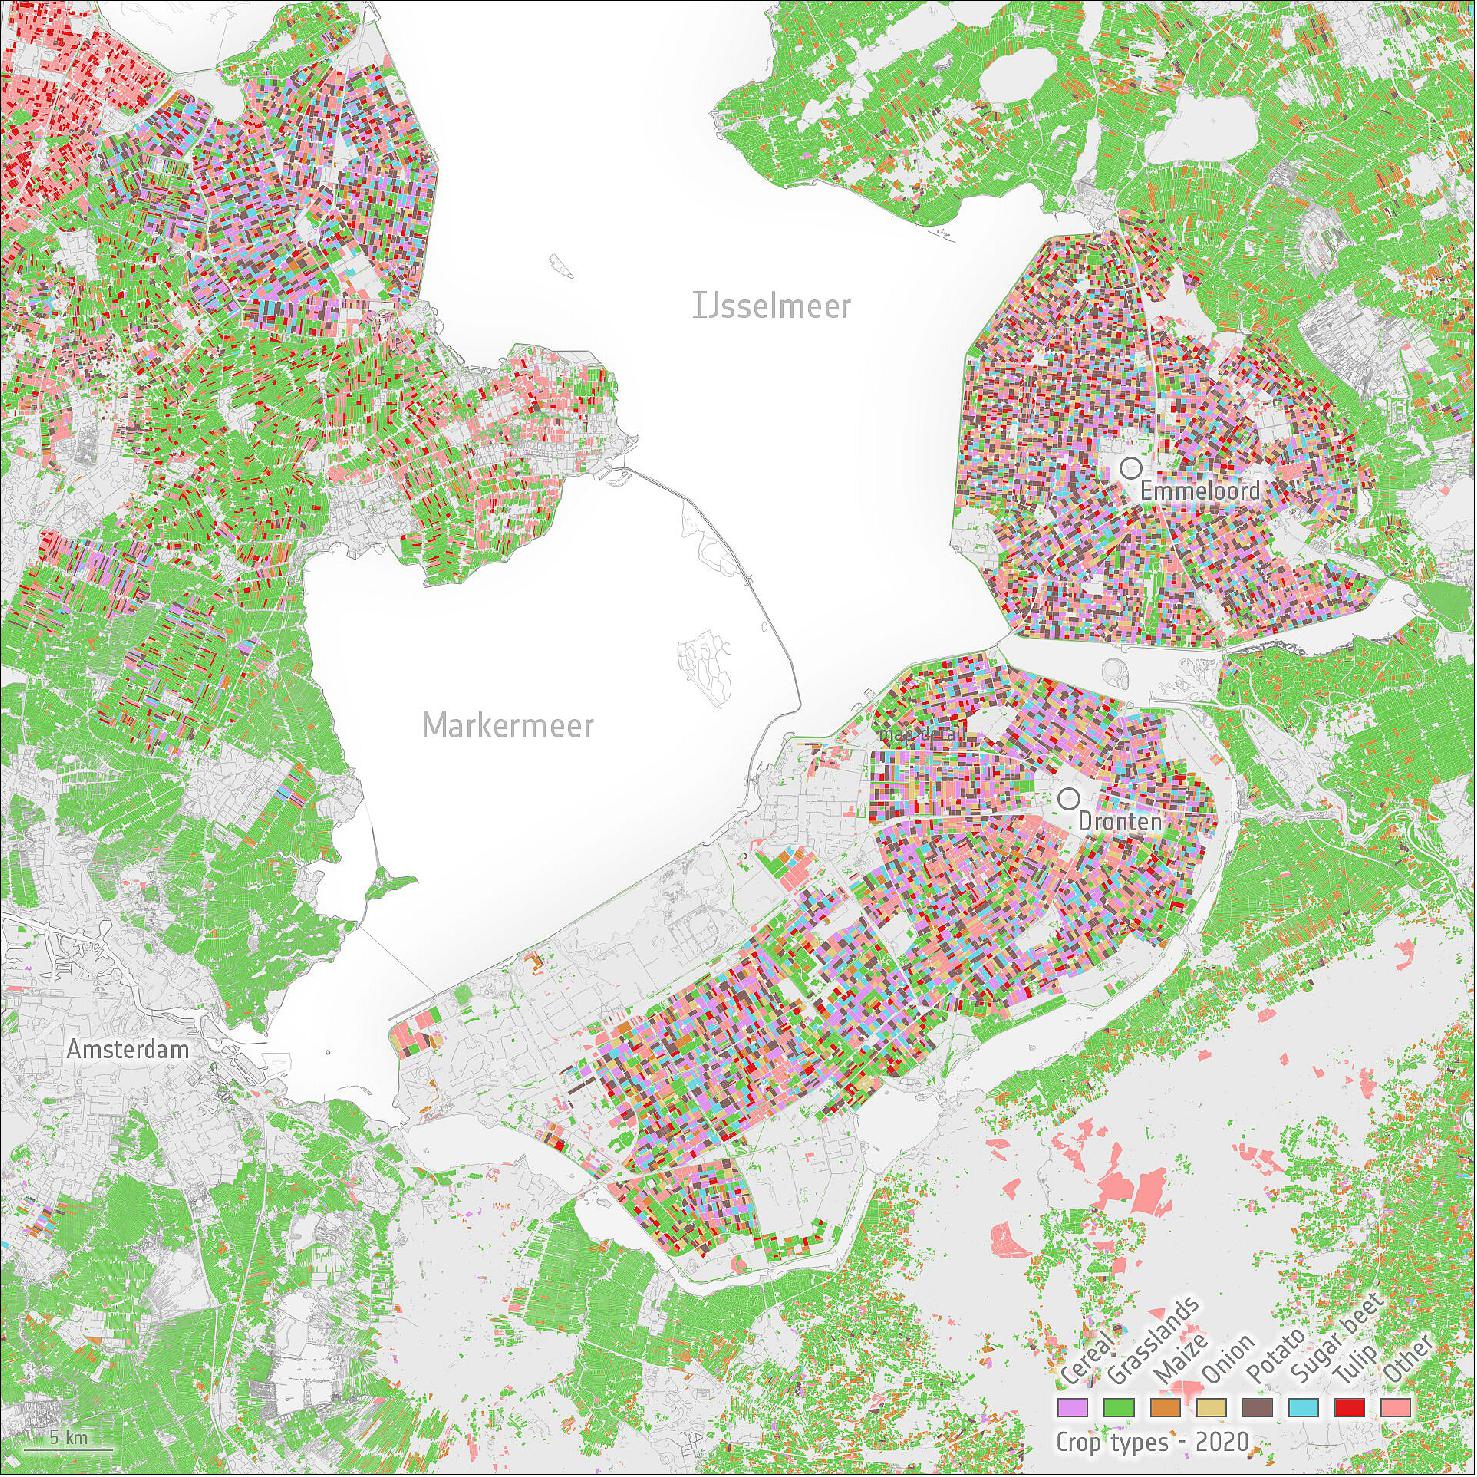 Crop type for all agricultural parcels Flevoland in the Netherlands